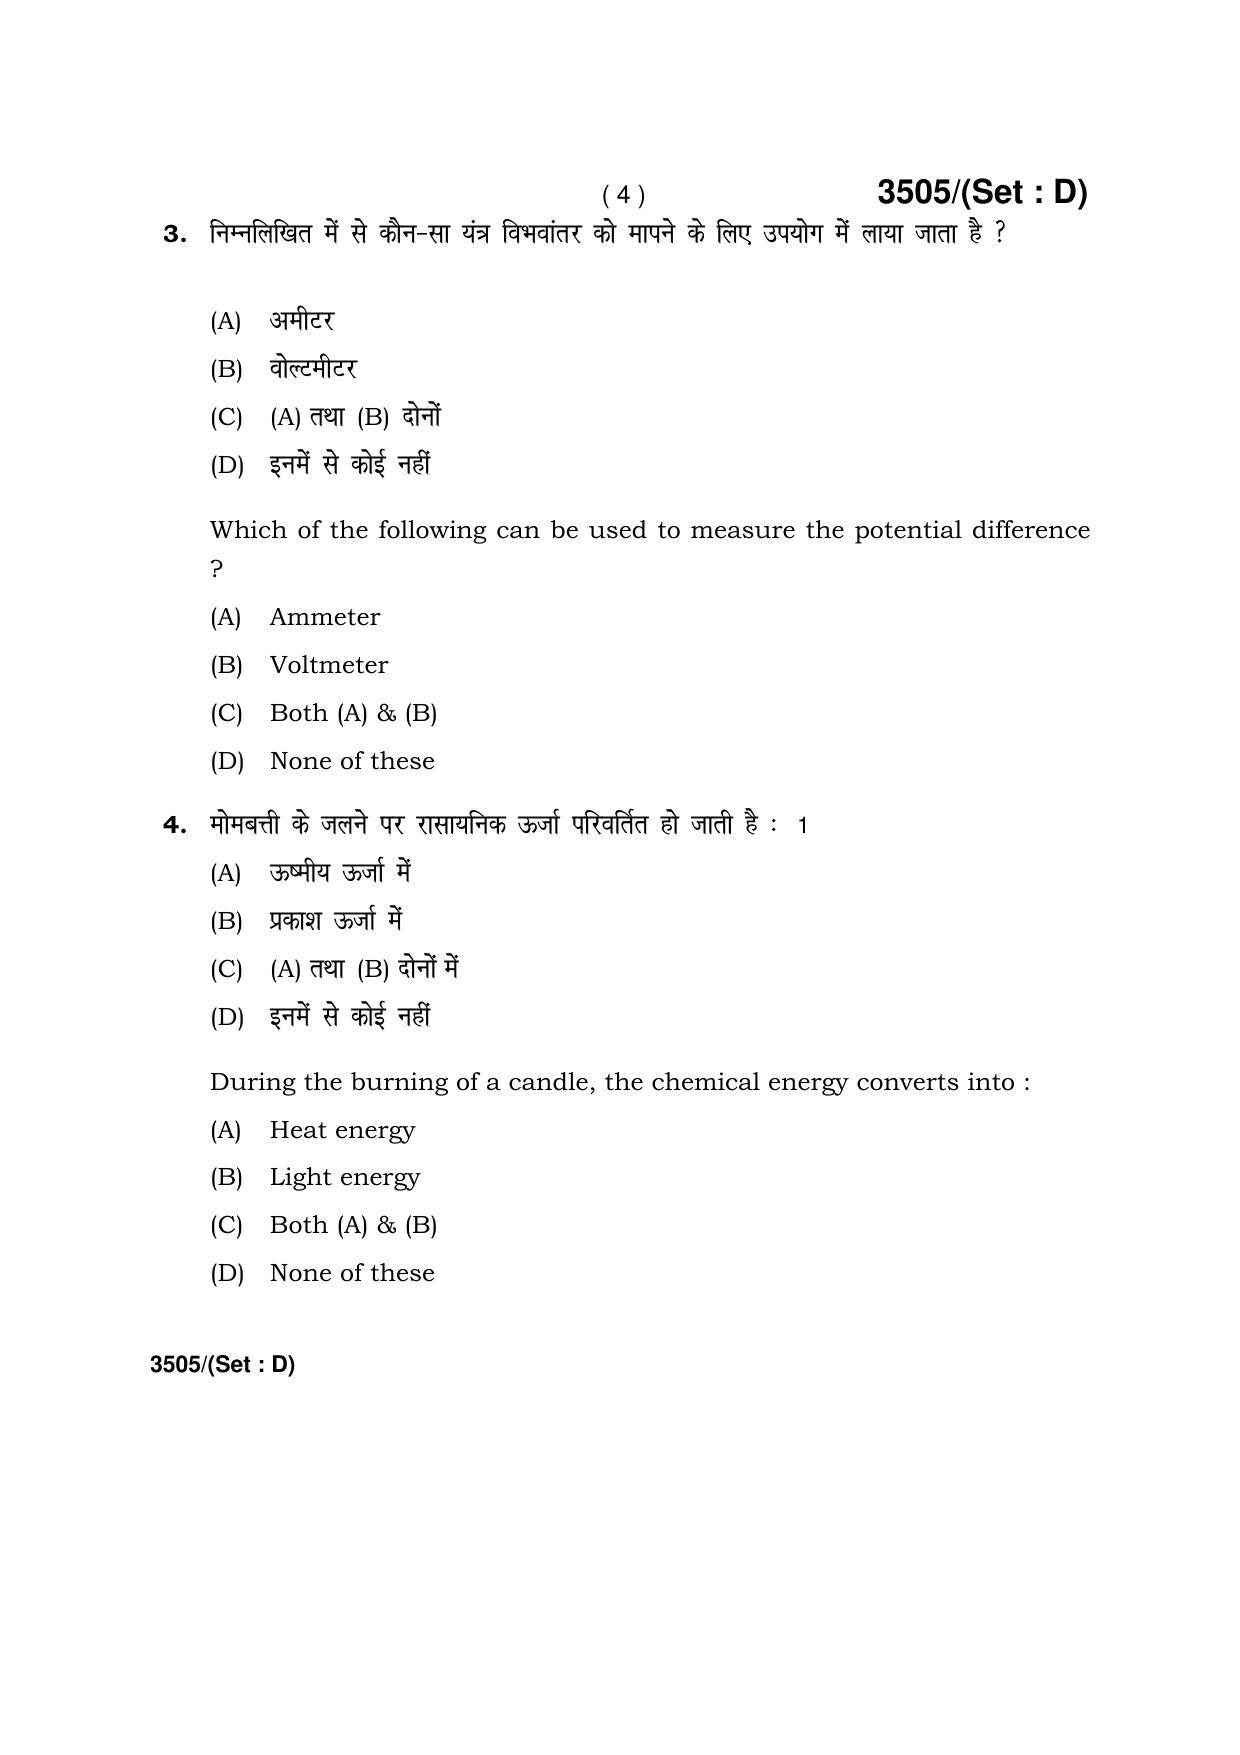 Haryana Board HBSE Class 10 Science -D 2018 Question Paper - Page 4